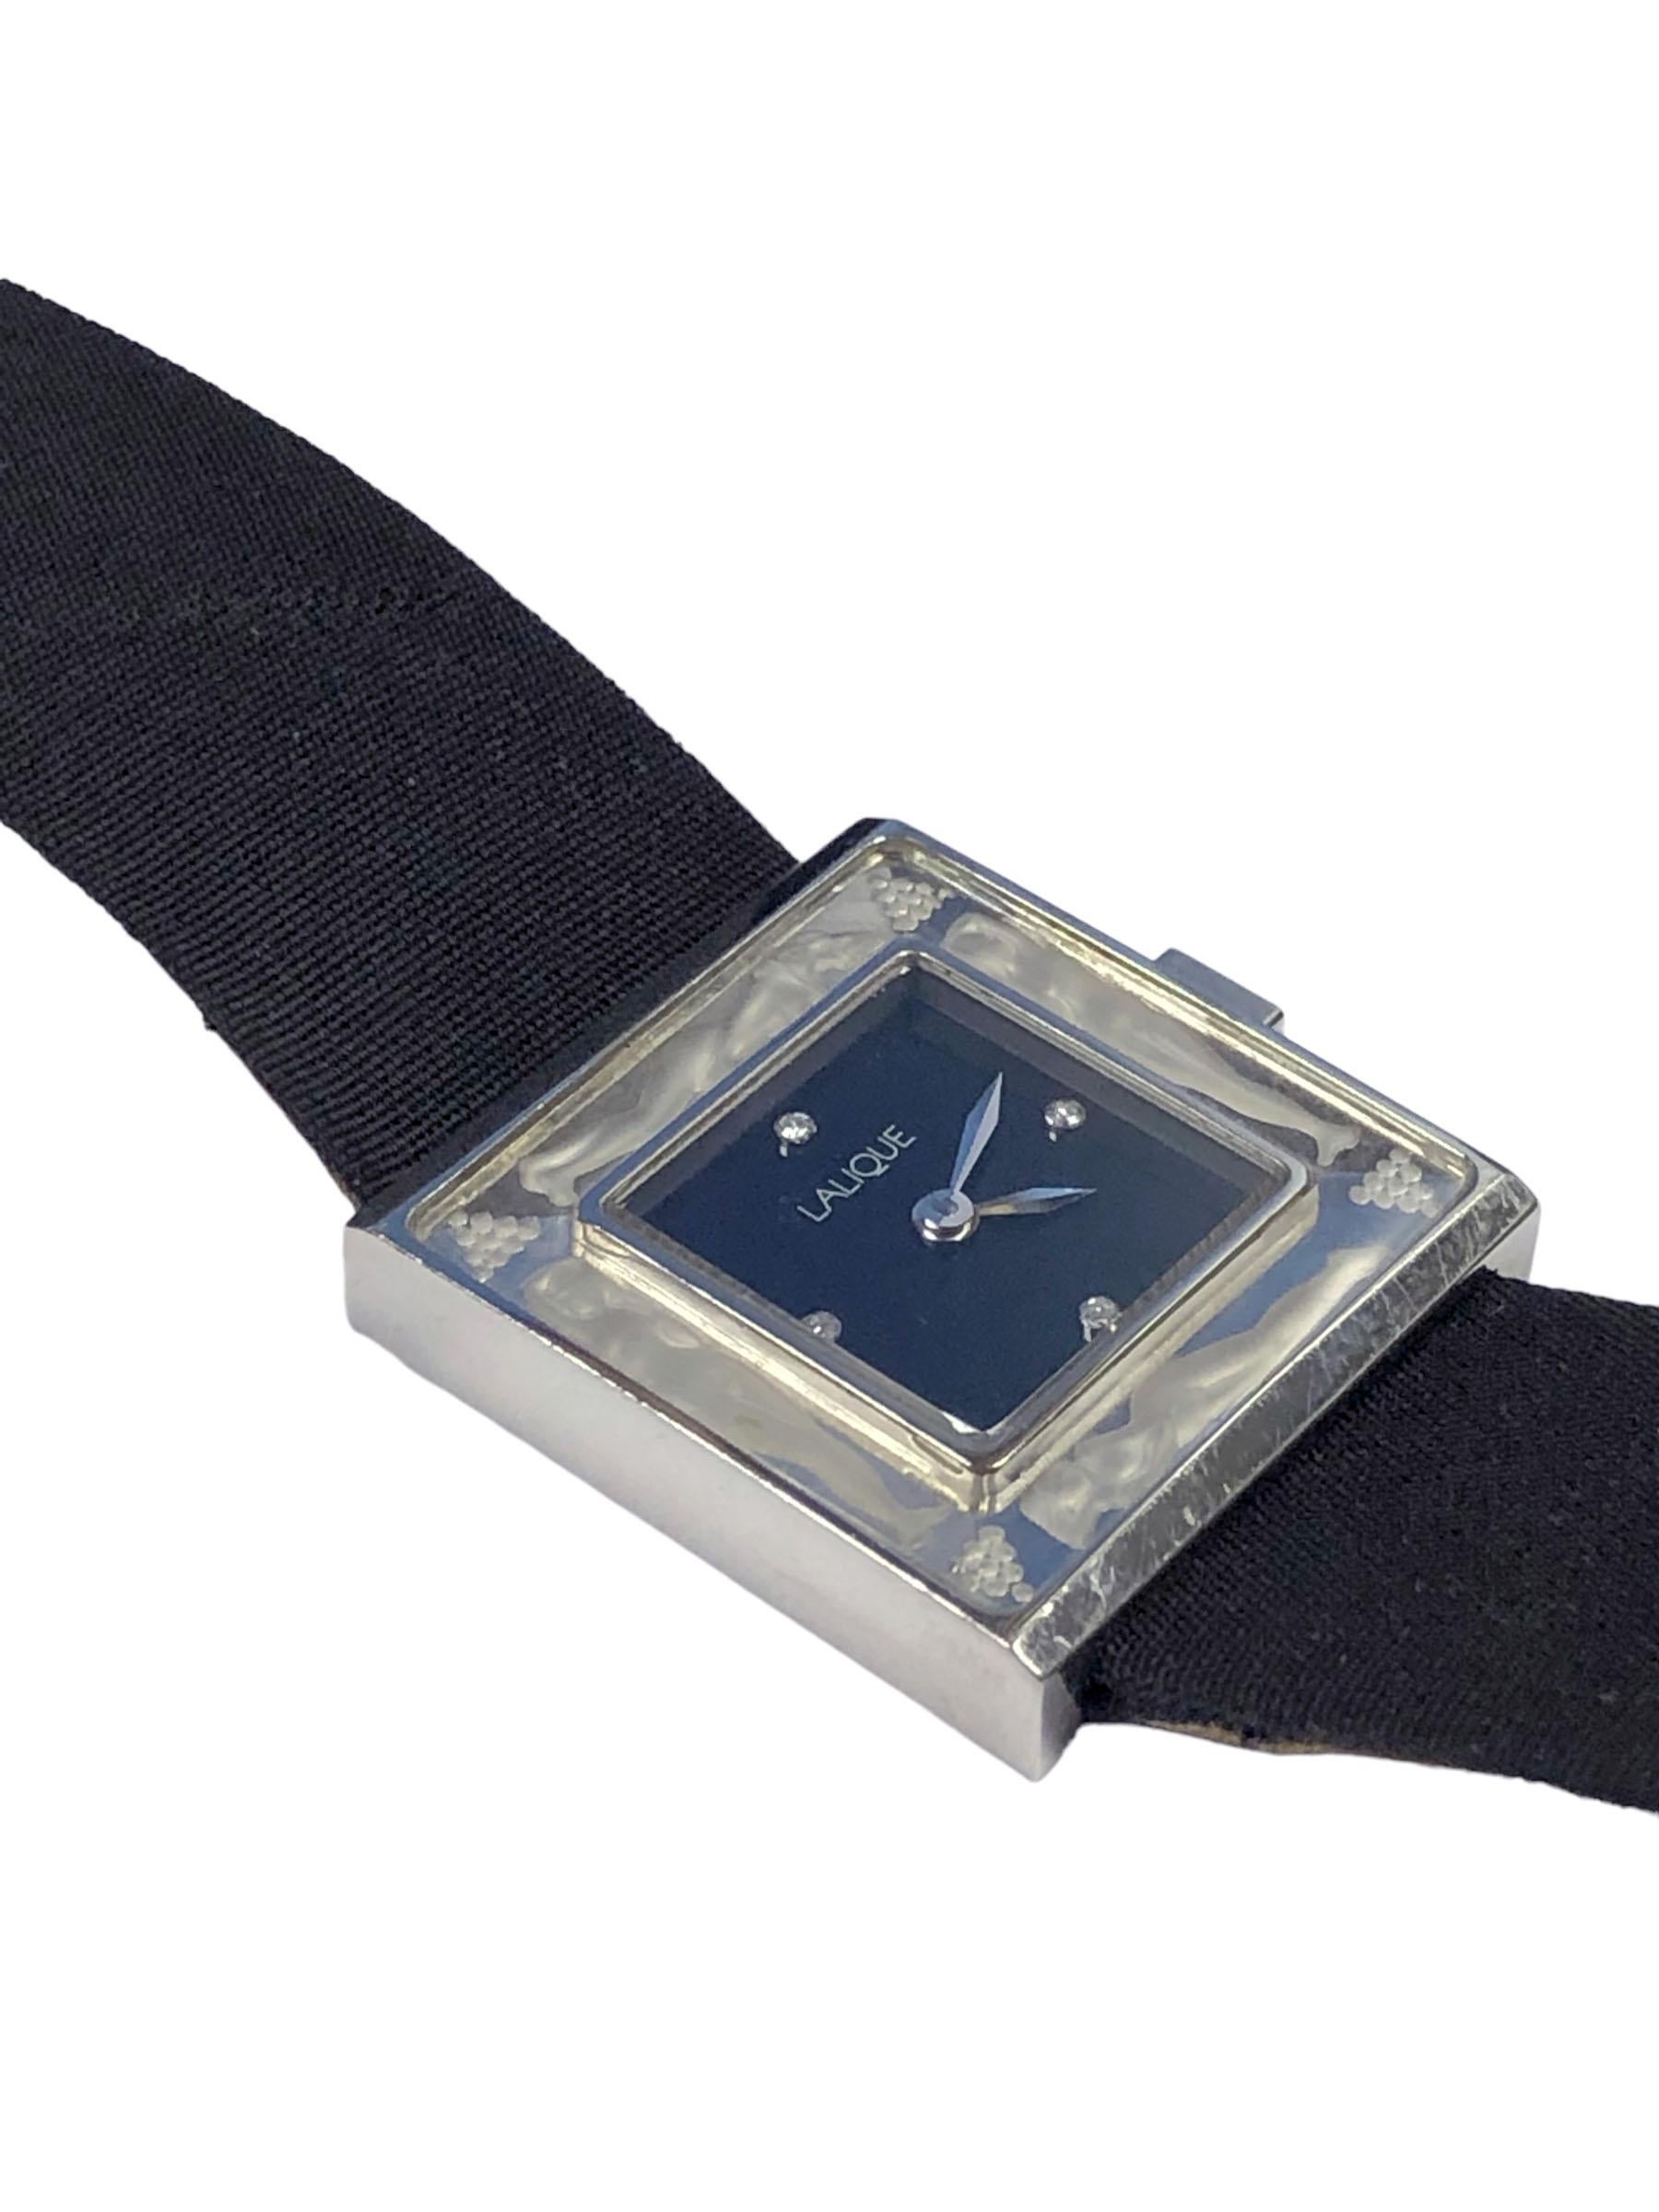 Circa 1990s Lalique Bacchantes Wrist Watch, 23 X 24 M.M. 2 Piece Stainless Steel case with inset Crystal, quartz movement, Black dial with 4 Diamonds. Original Black Satin Strap with original Steel buckle. Watch length 8 inches. 